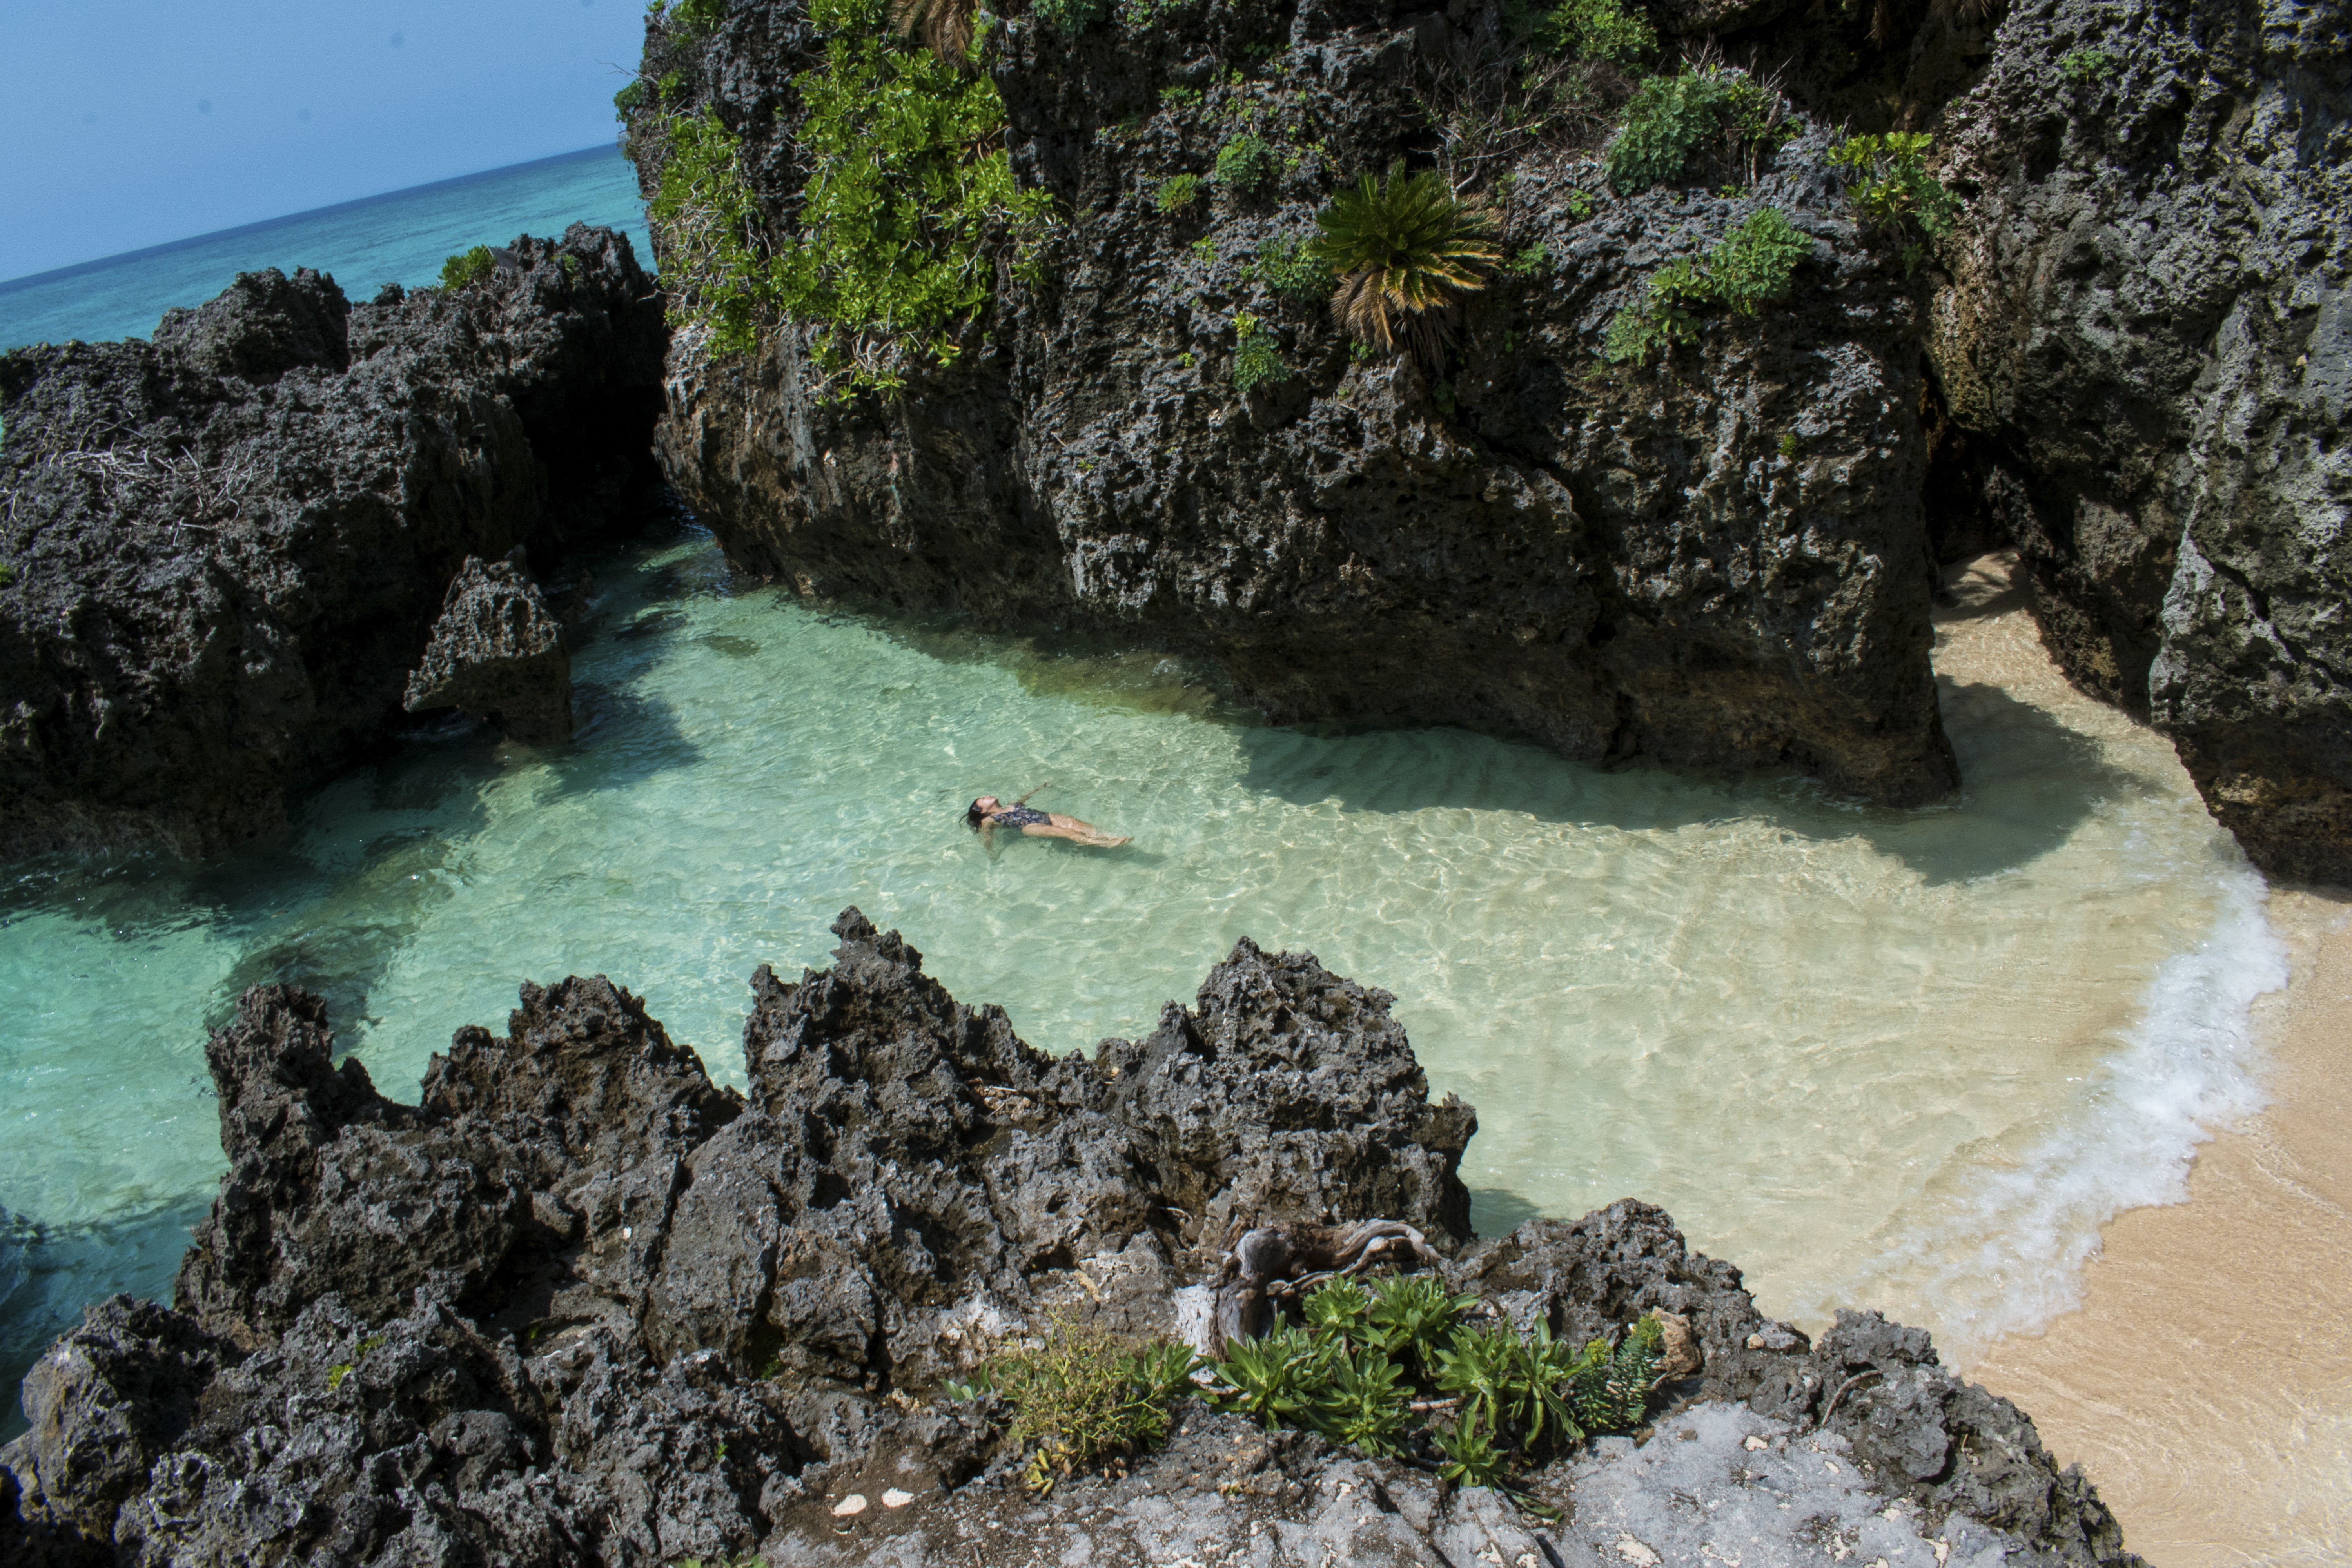 White sand beaches, clear waters: swimming on Yoron’s Udonosu Beach. Photo: Lucy Dayman